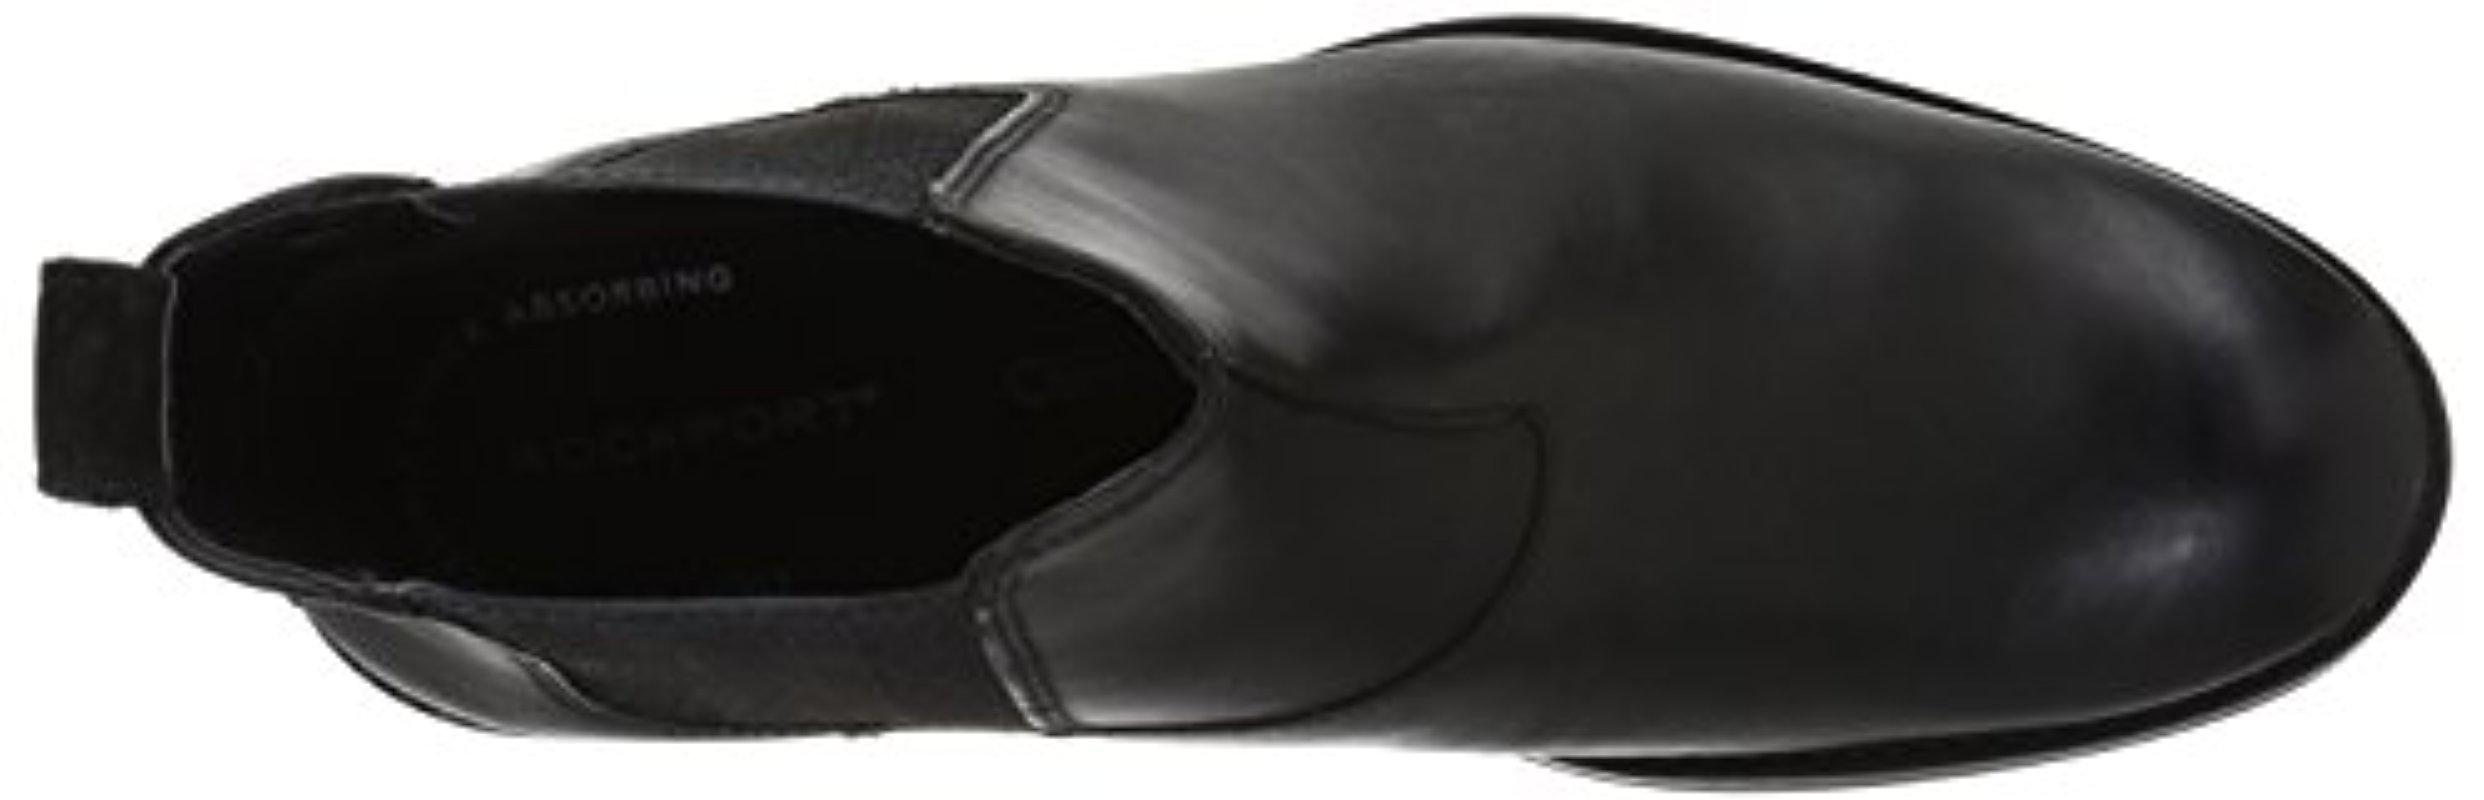 Rockport Leather Wynstin Chelsea Boots in Black for Men - Lyst